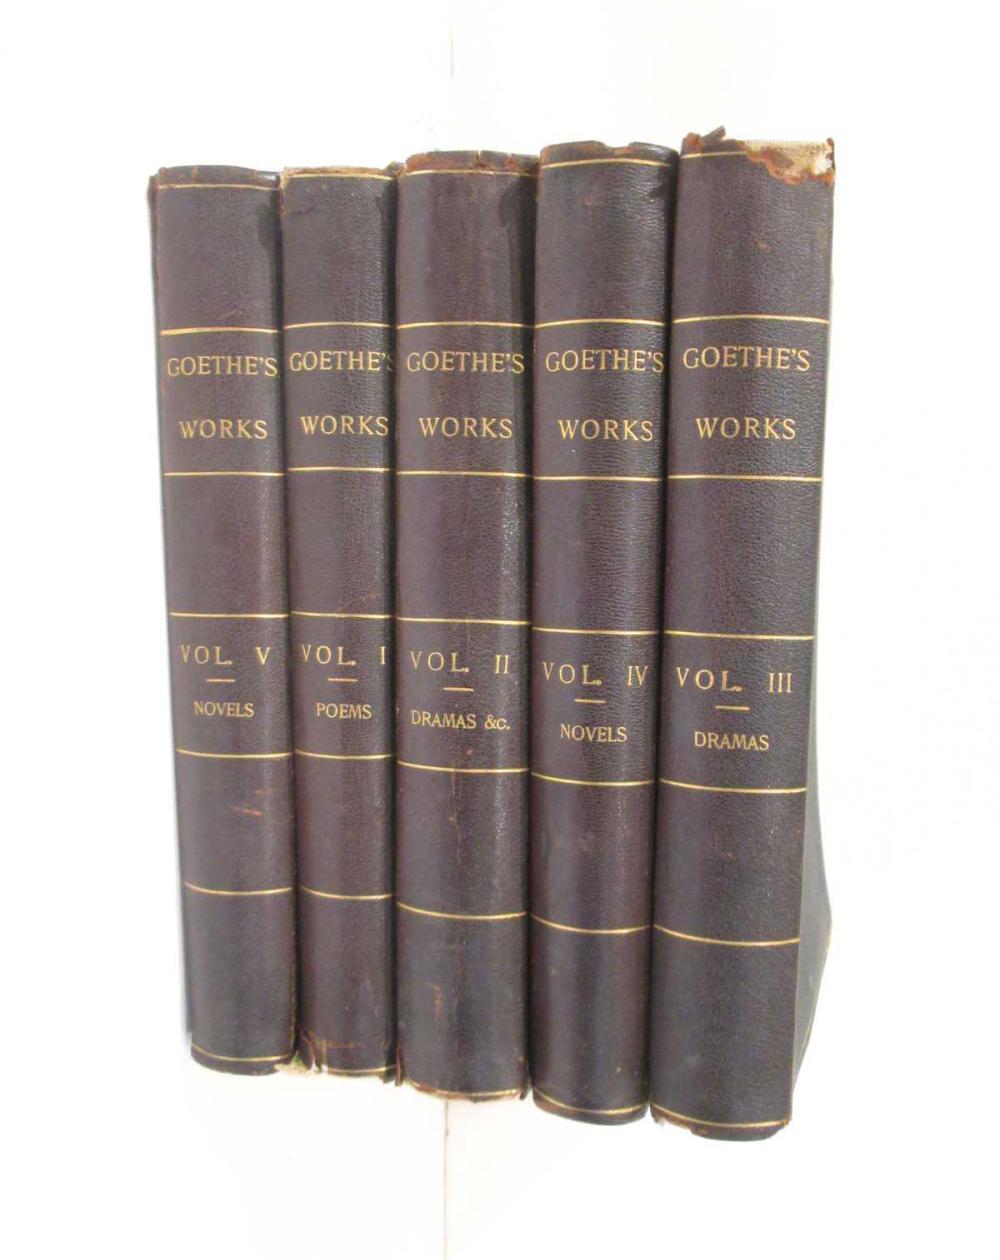 COLLECTIBLE BOOKS: "GOETHE'S WORKS,